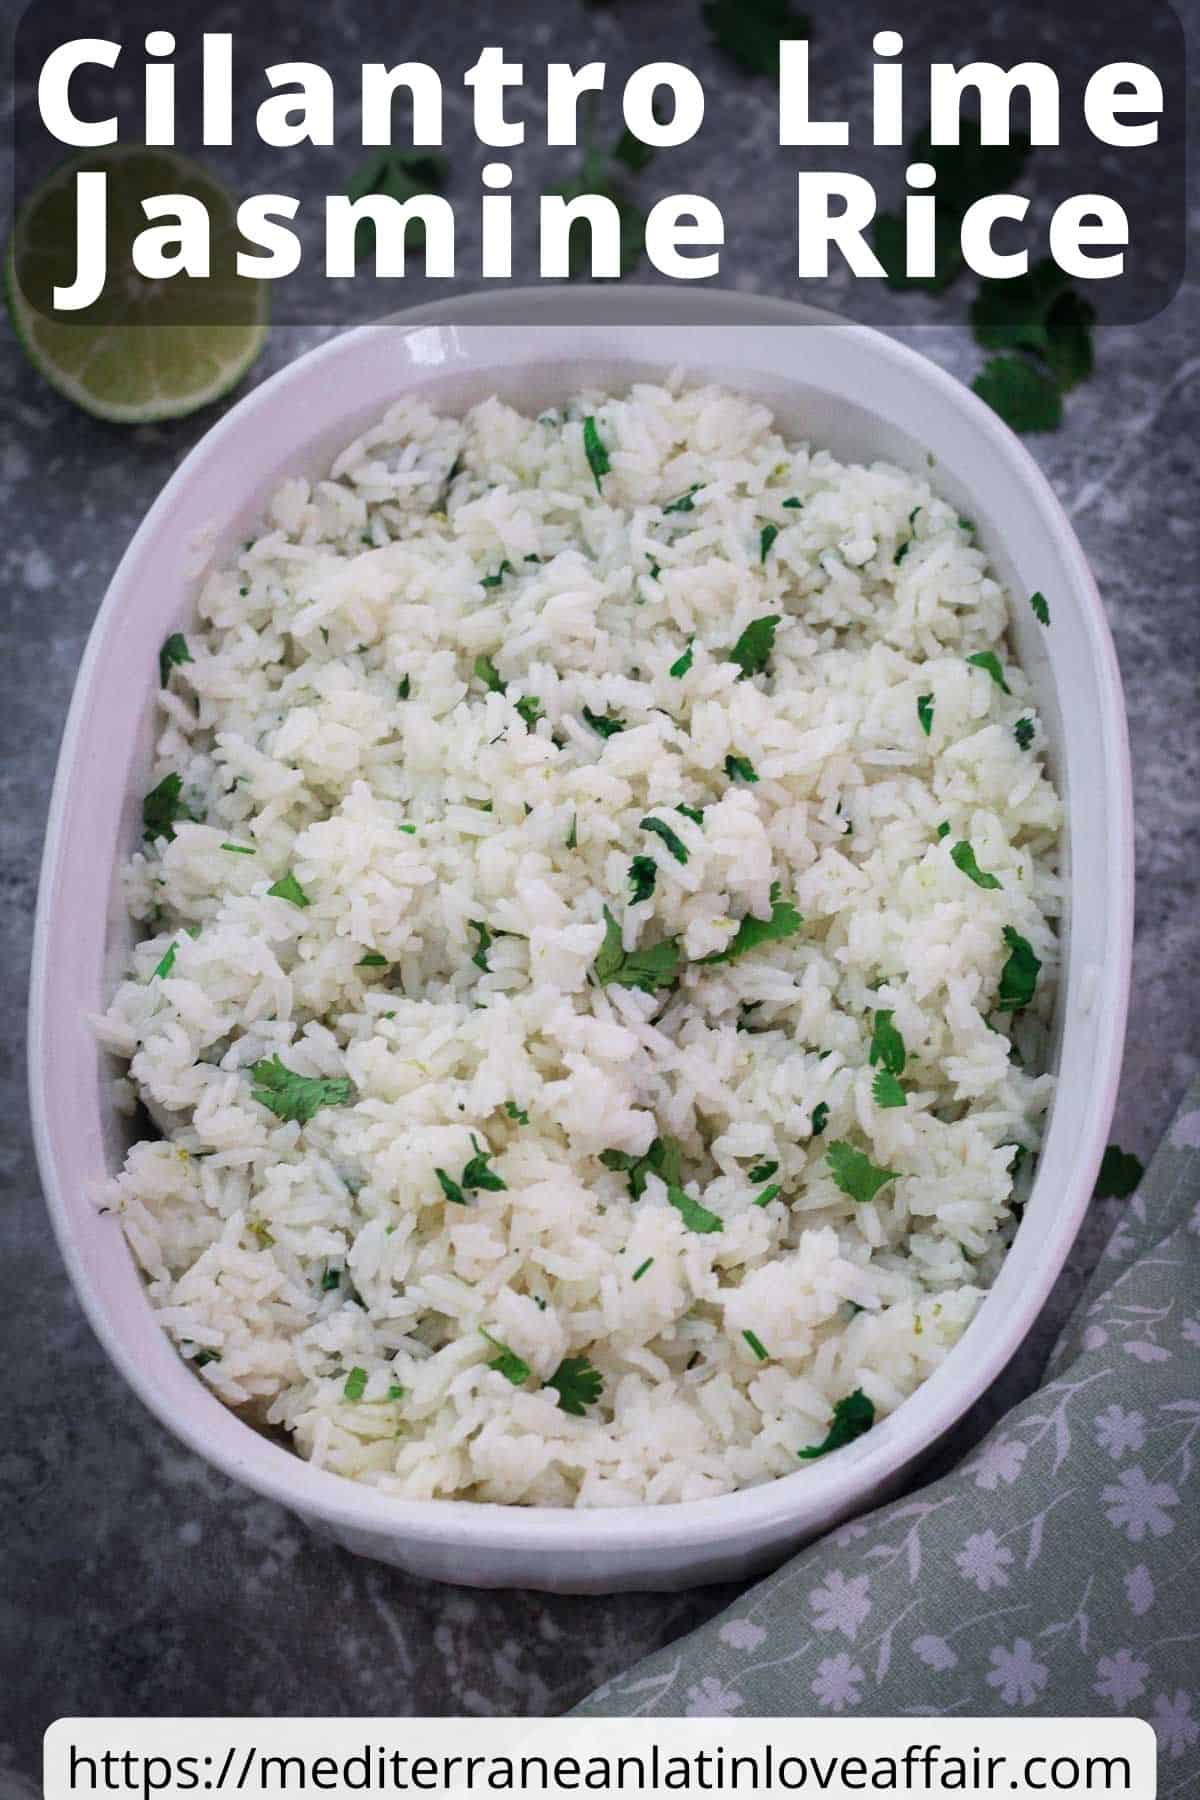 An image prepared for Pinterest. It shows a picture of a white ceramic bowl with cilantro lime jasmine rice with more garnishes around the bowl. There's title bar over the picture and a website link at the bottom.